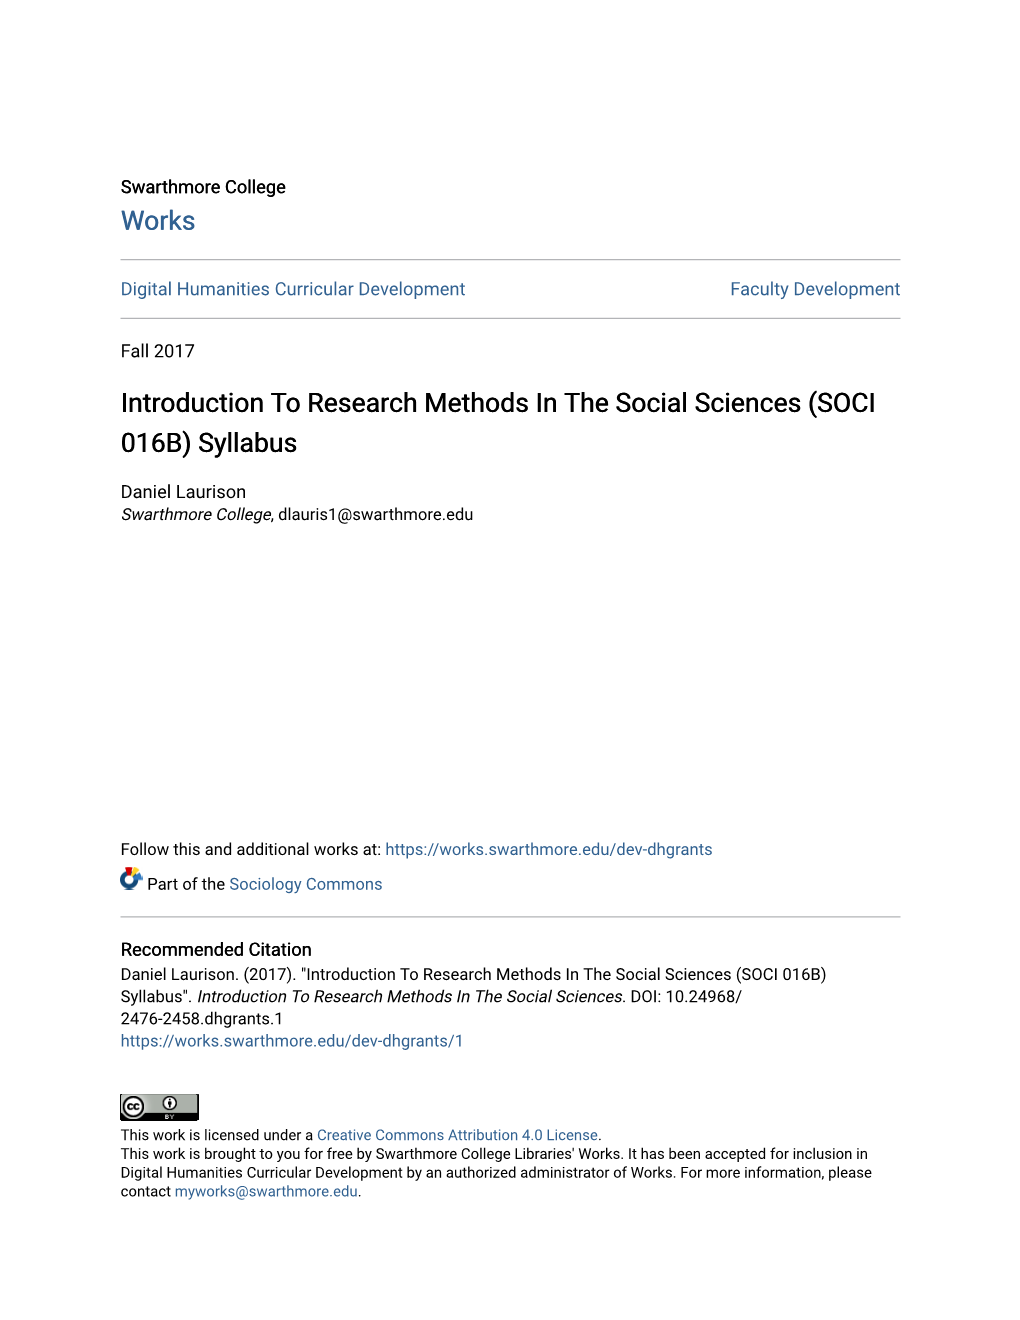 Introduction to Research Methods in the Social Sciences (SOCI 016B) Syllabus